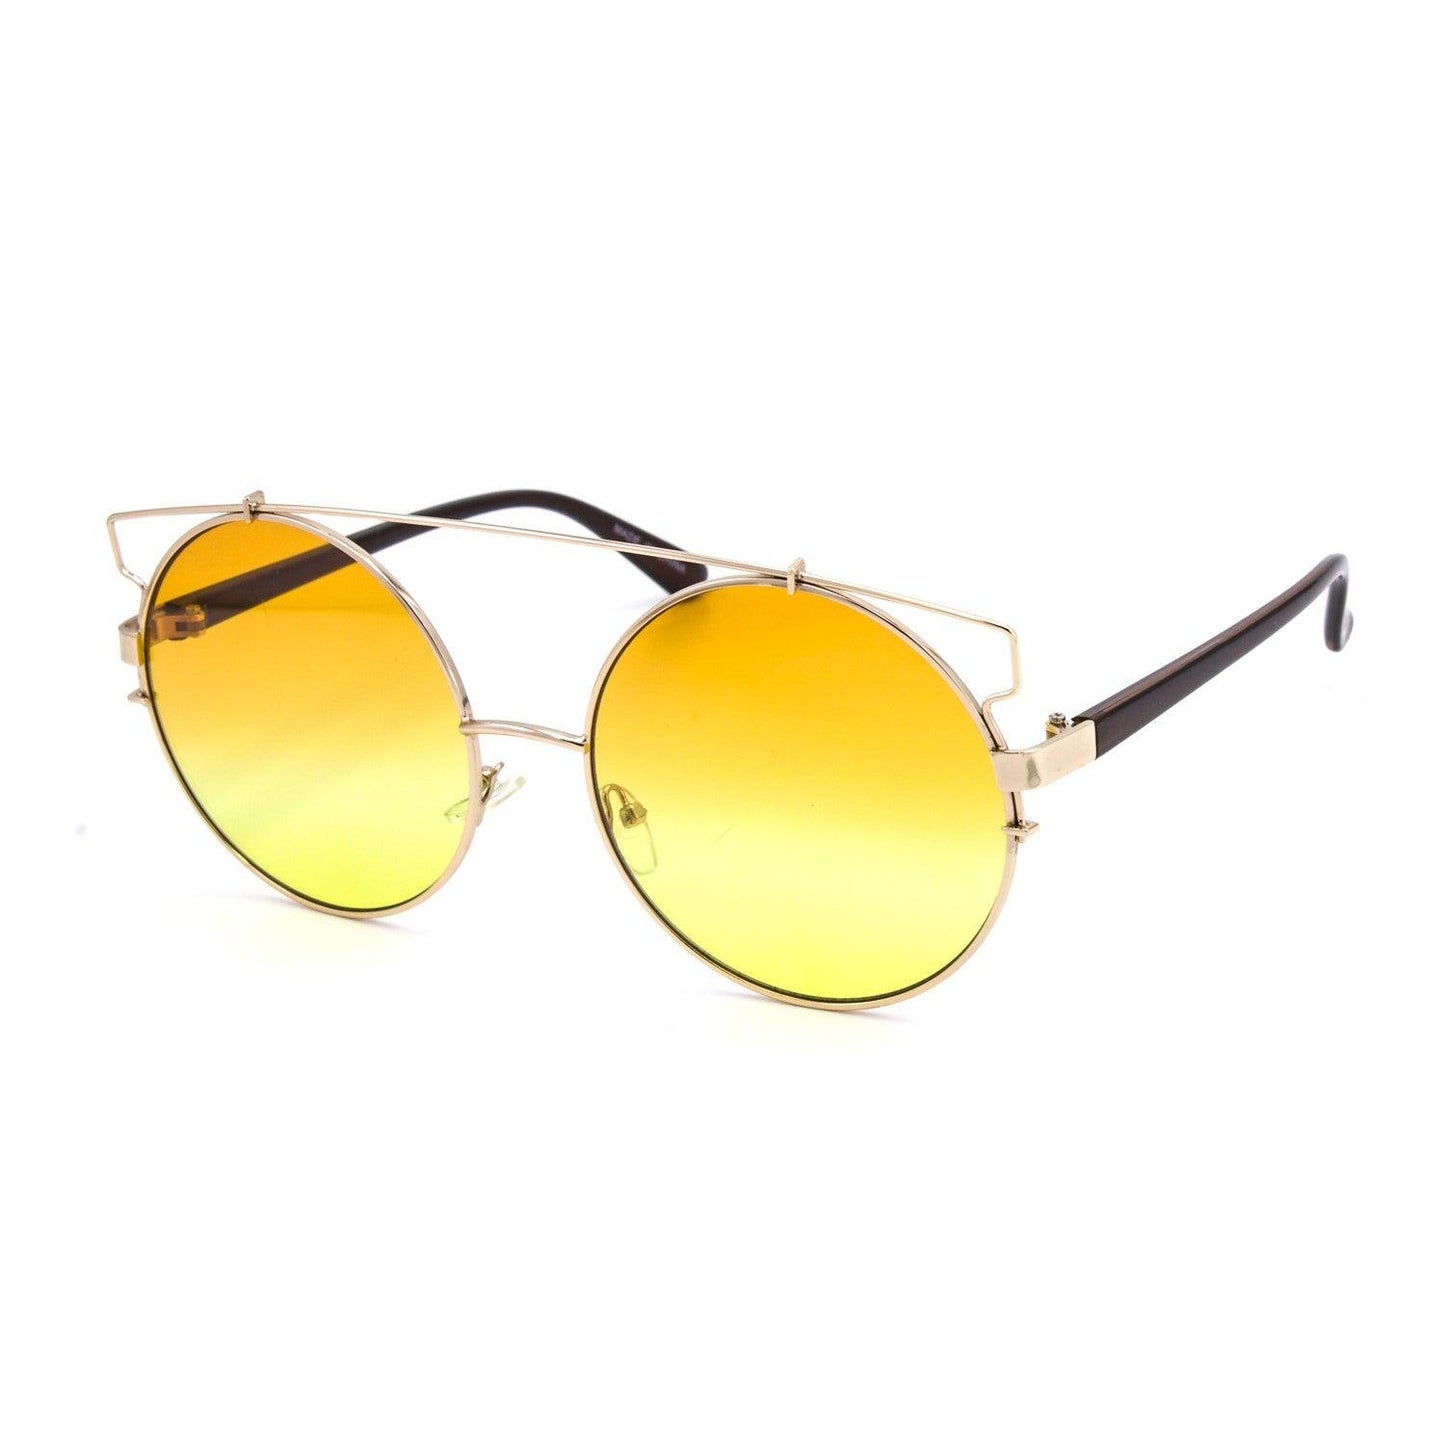 Fashion Round Sunglasses with Metal Bar - Weekend Shade Sunglasses